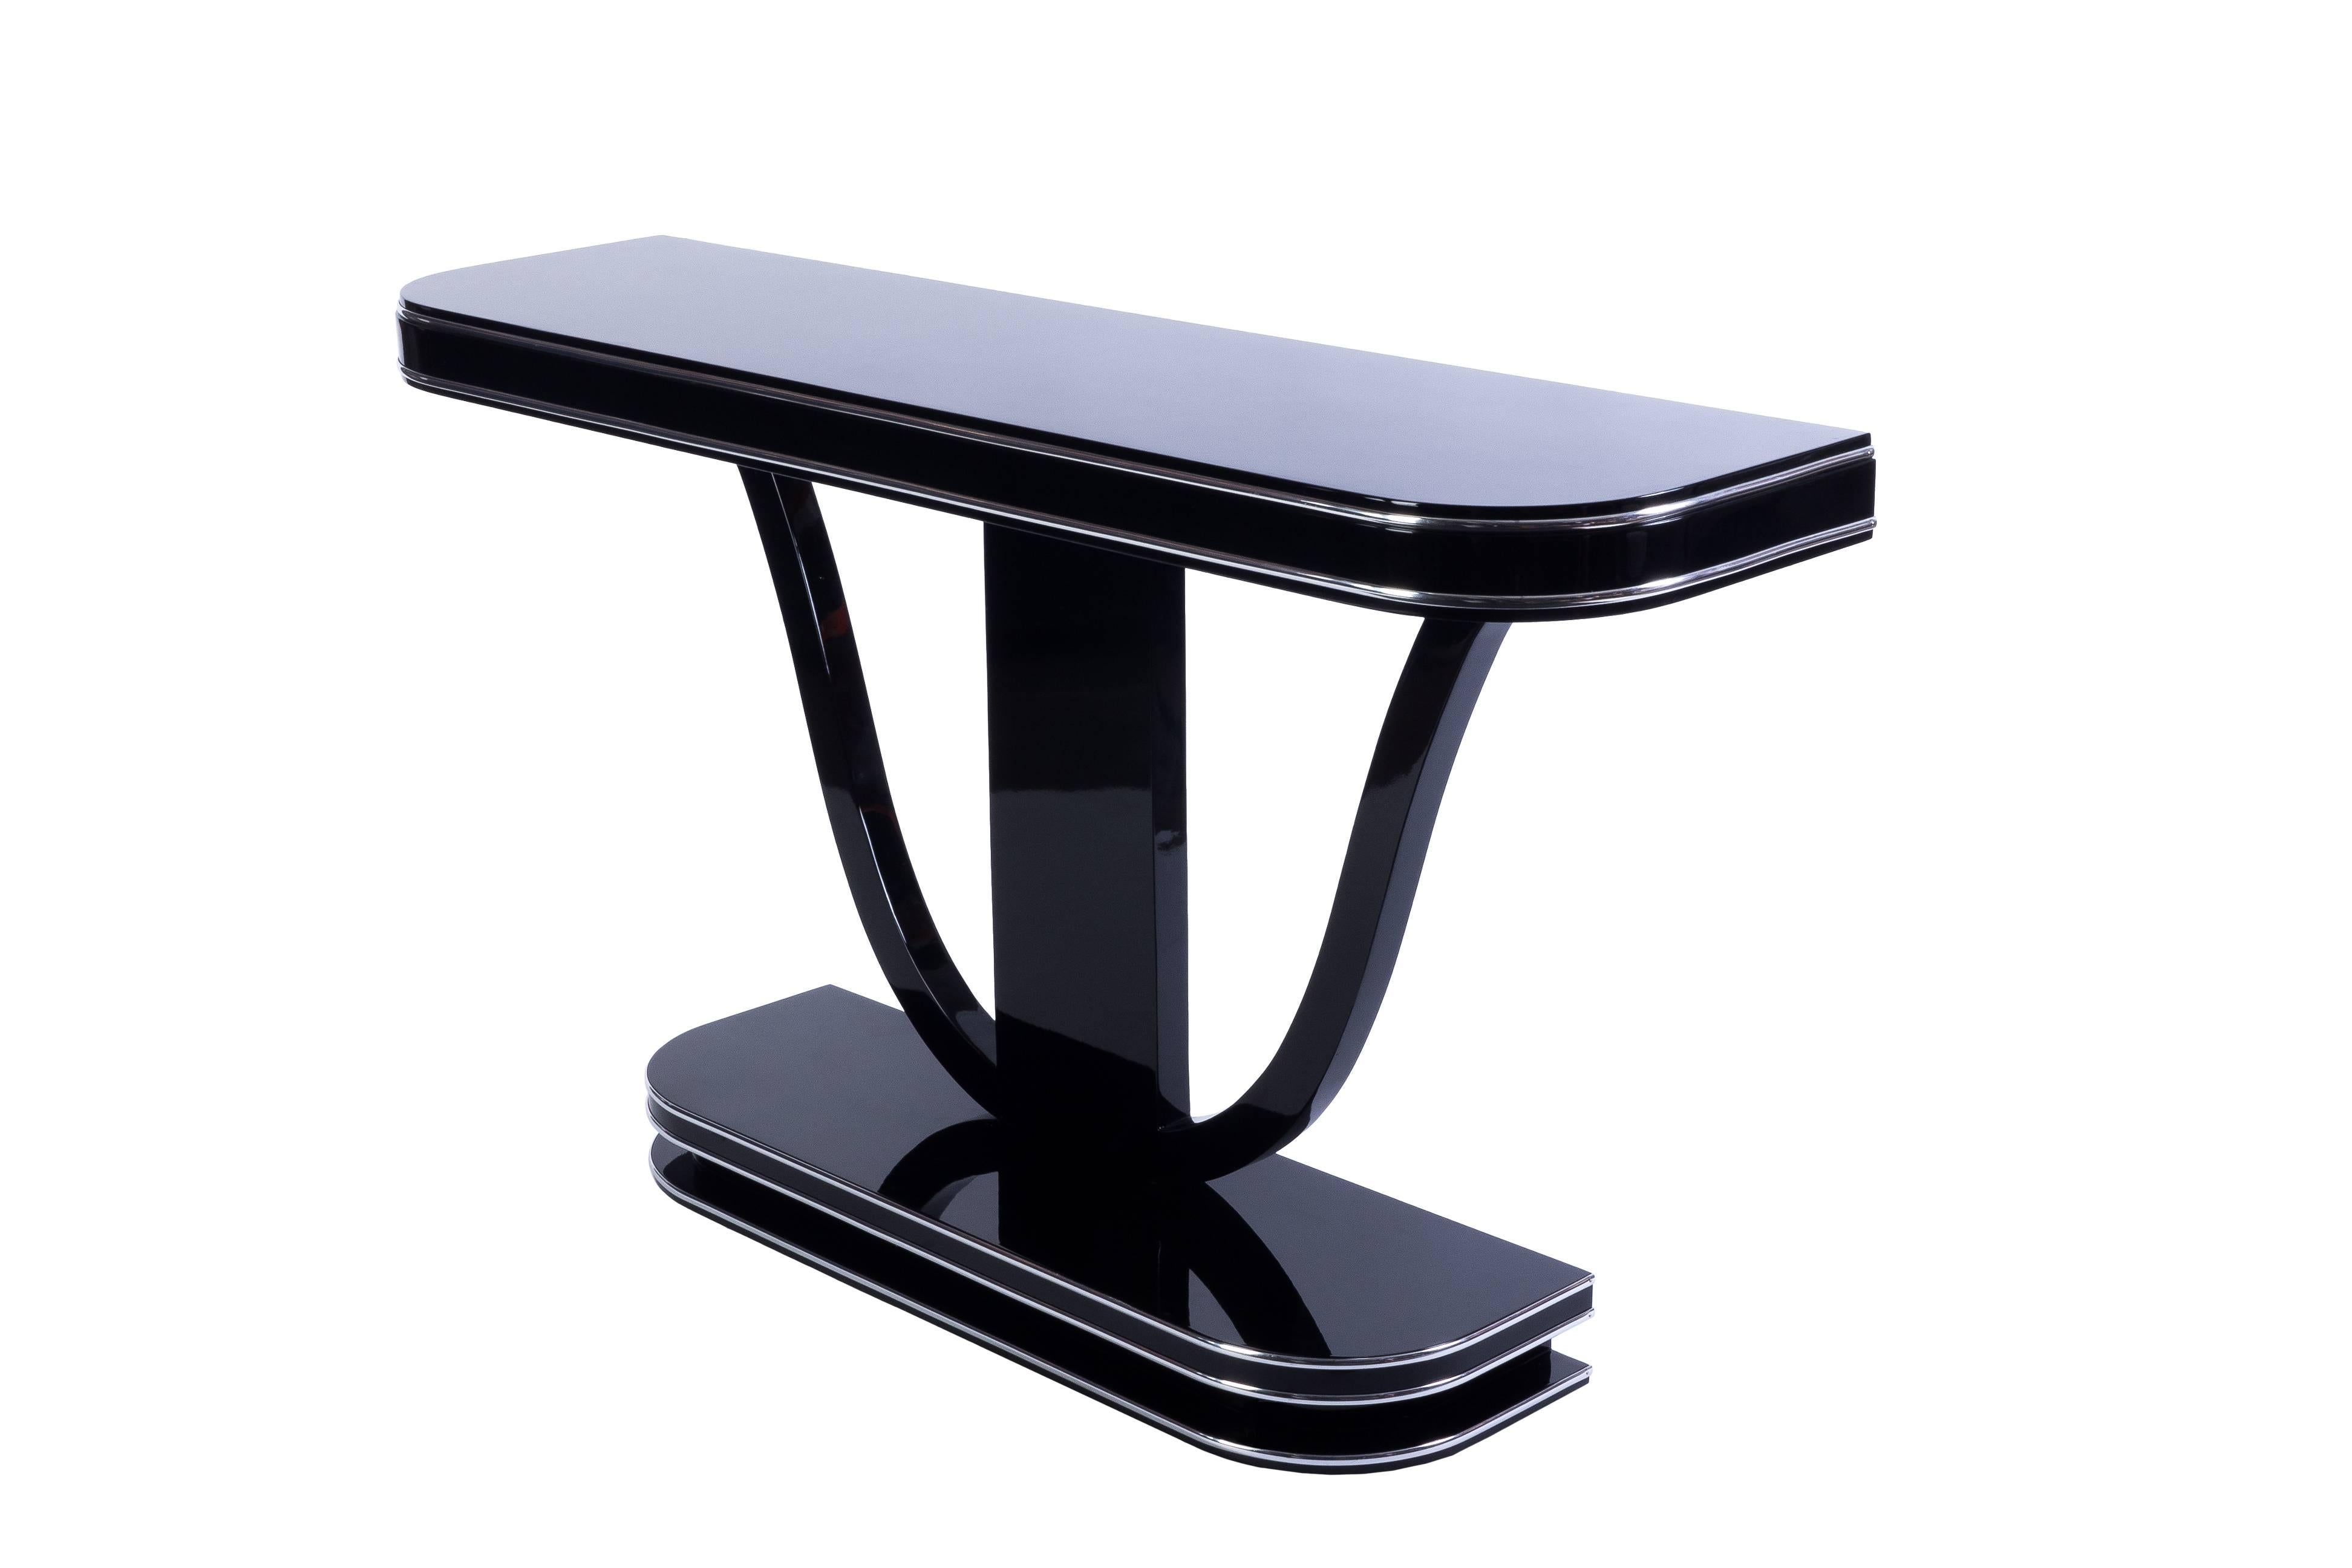 This superb French Art Deco style console features a high gloss black lacquer finish with curved detailing and chrome line details.